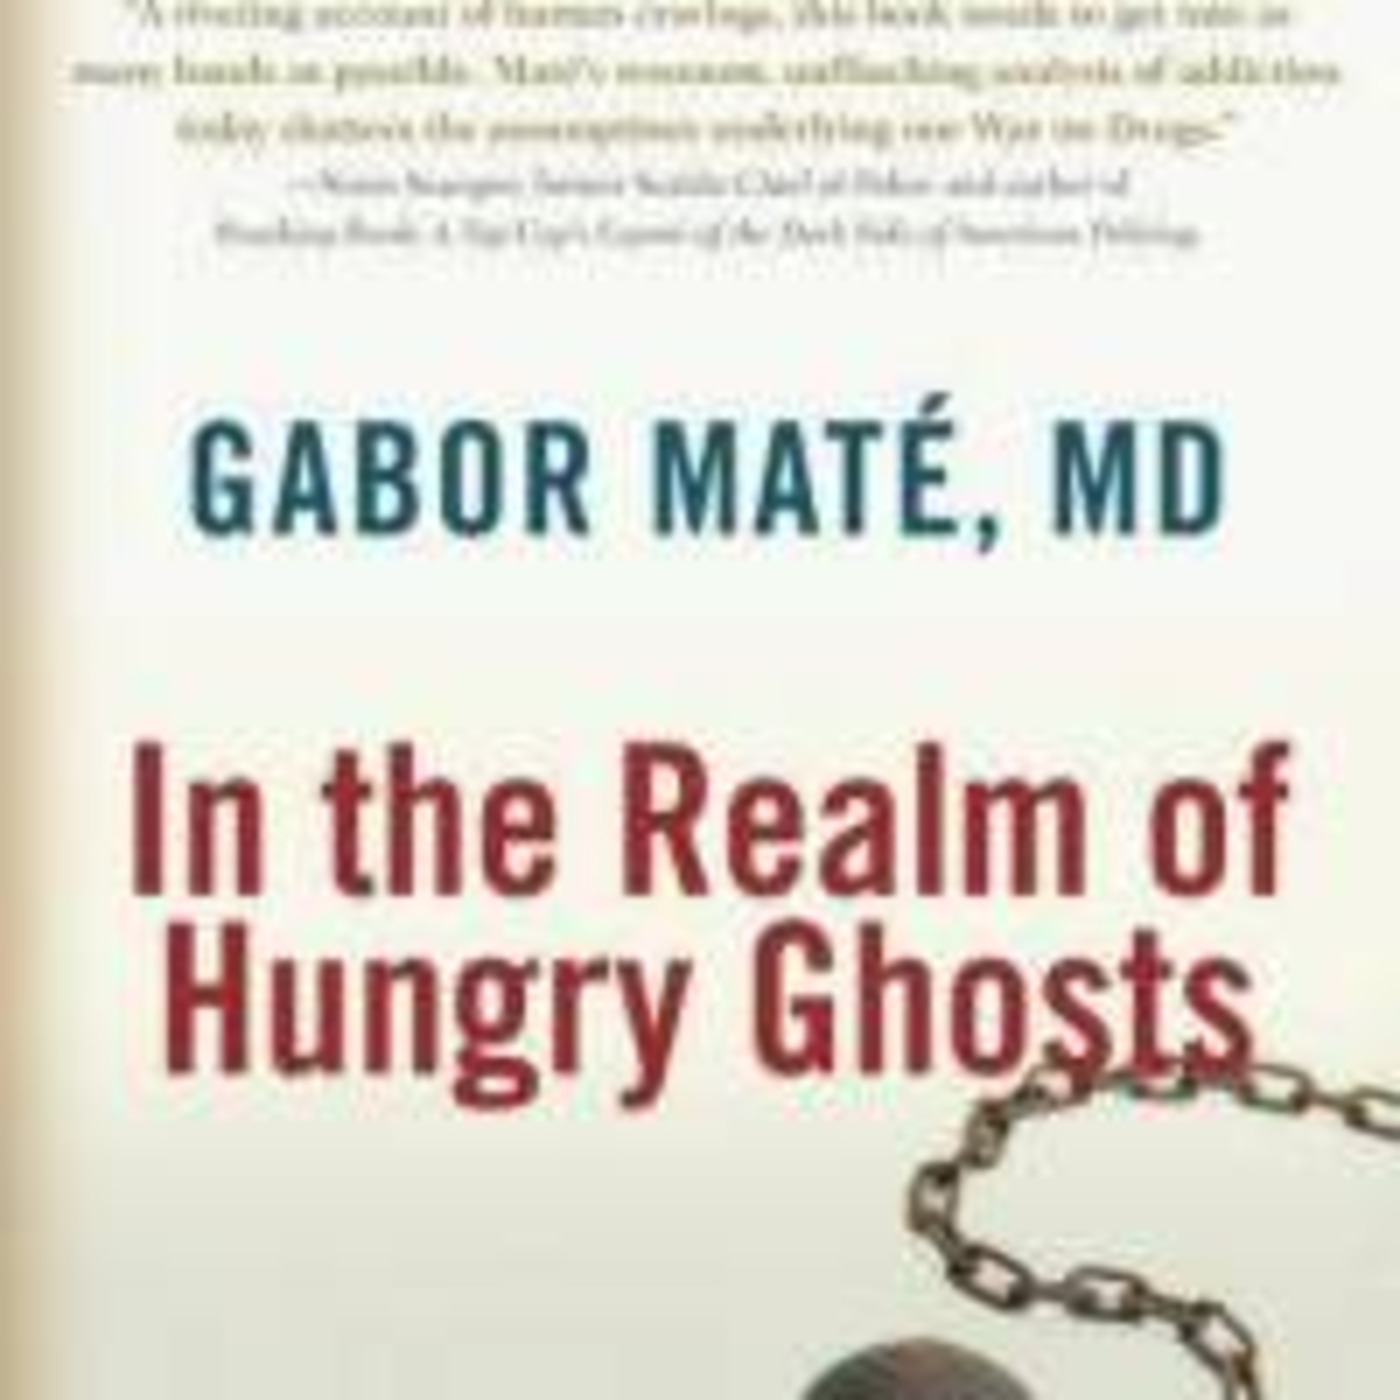 Q&A: GABOR MATE-MD, Author - IN THE REALM OF HUNGRY GHOSTS